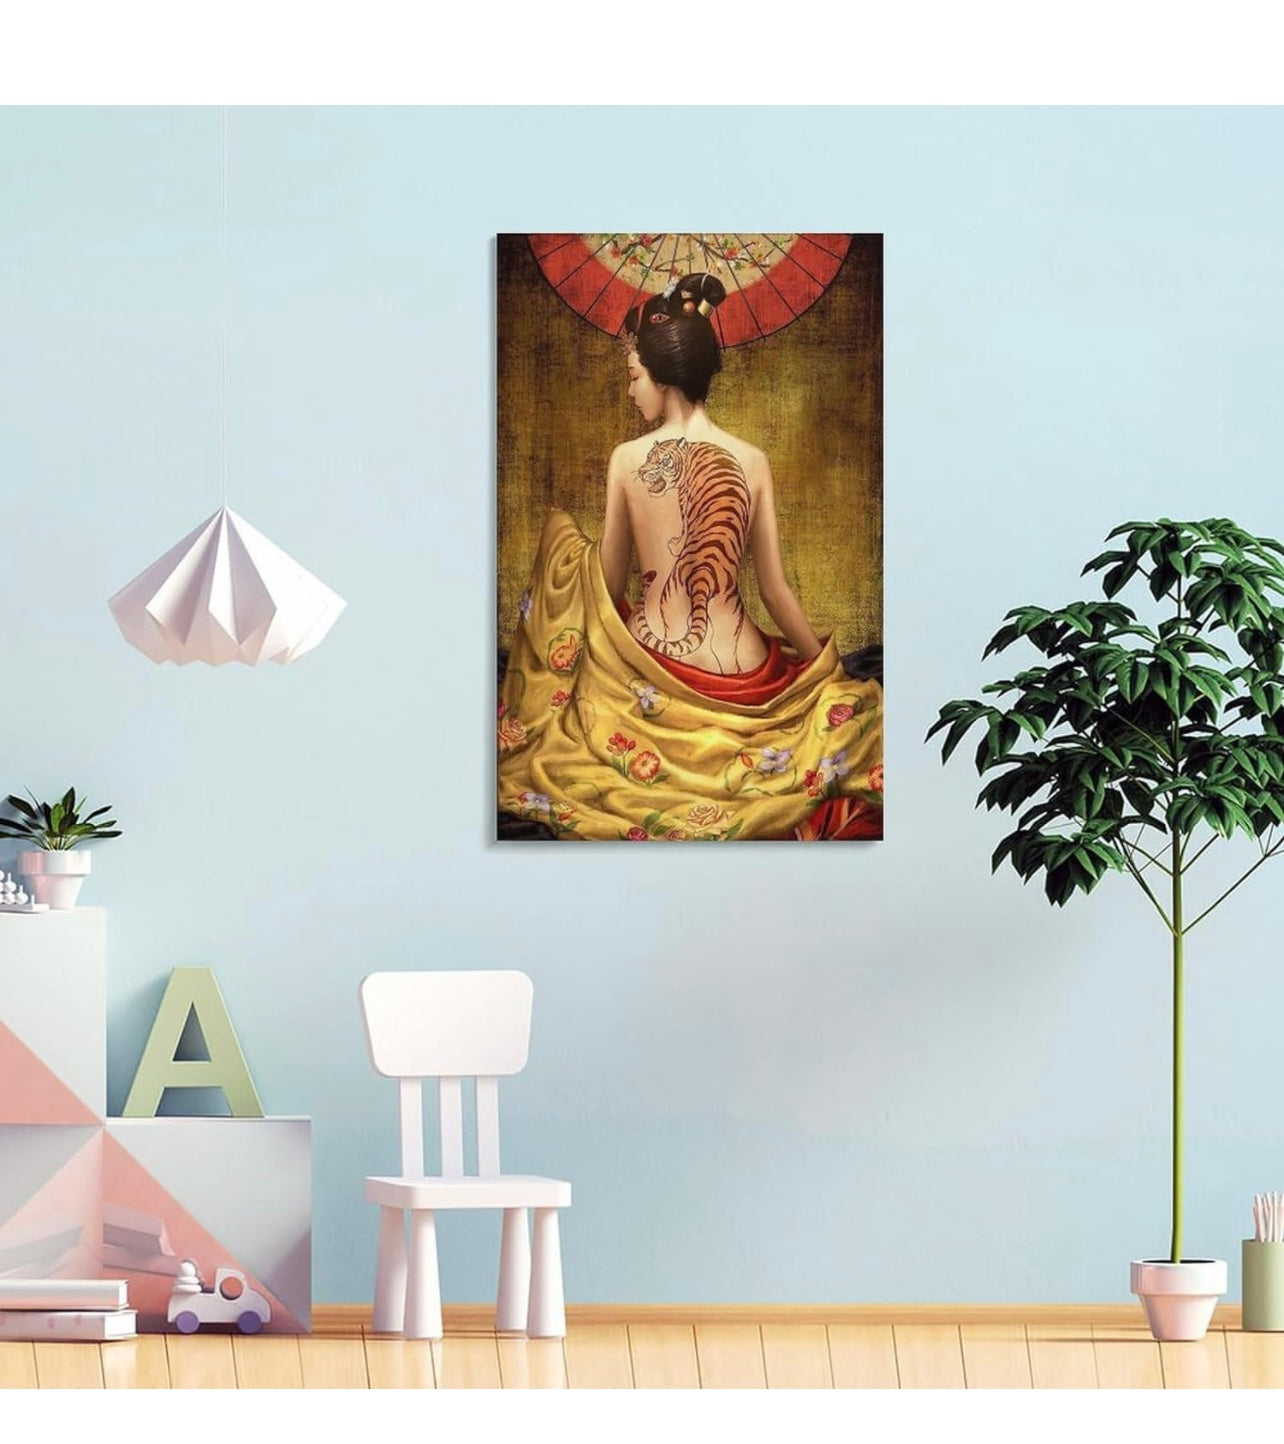 Japanese Woman Canvas Art Tiger Tattoo Painting Pictures Vintage Prints Canvas Wall Art Prints for Wall Decor Room Decor Bedroom Decor Gifts 24x36inch(60x90cm) Frame-Style